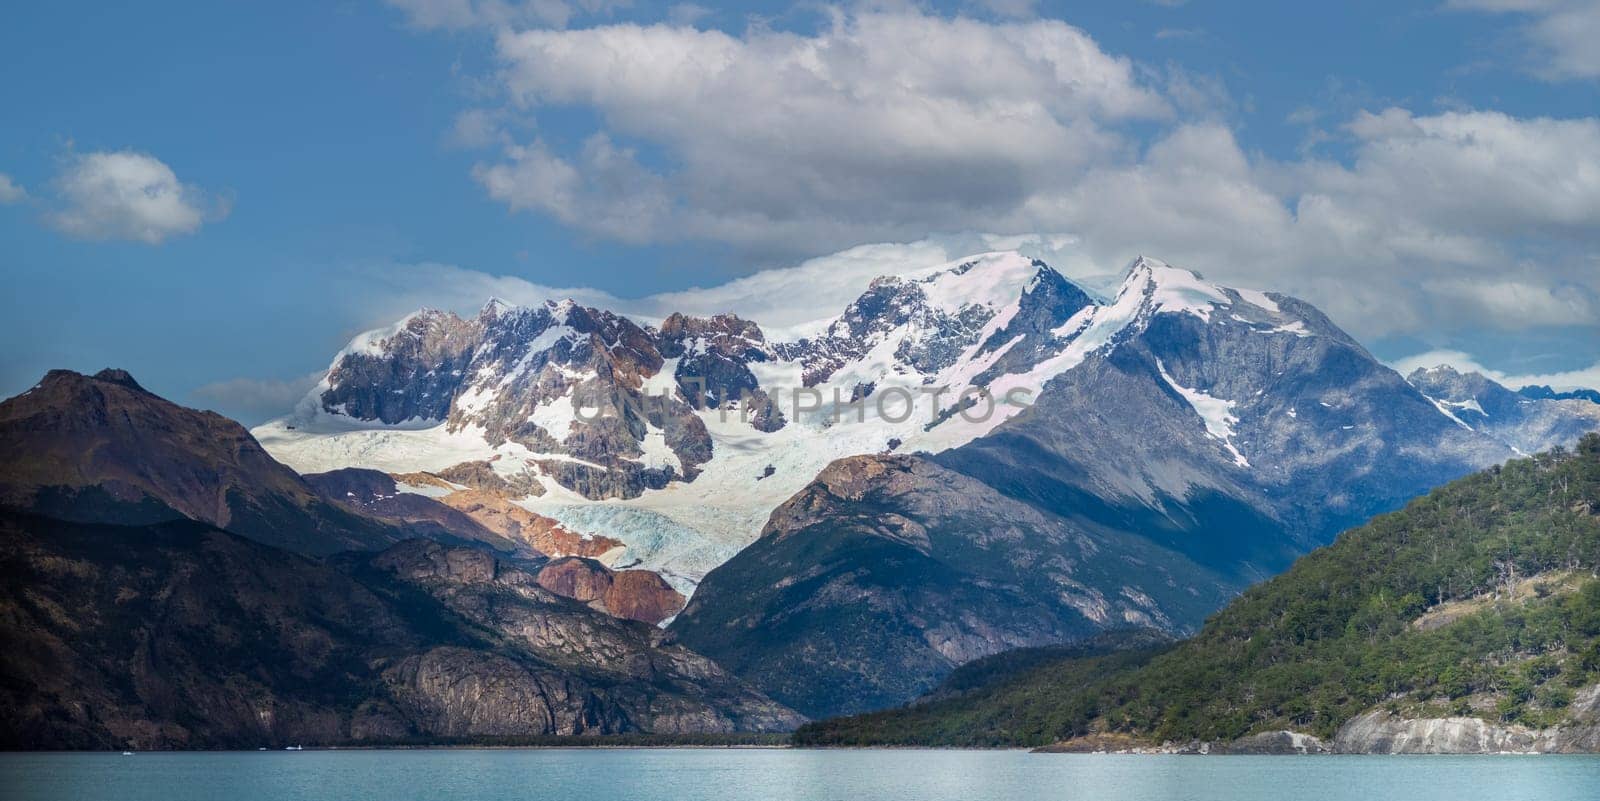 Captivating glacier nestled between craggy peaks beside a tranquil, mirror-like lake.